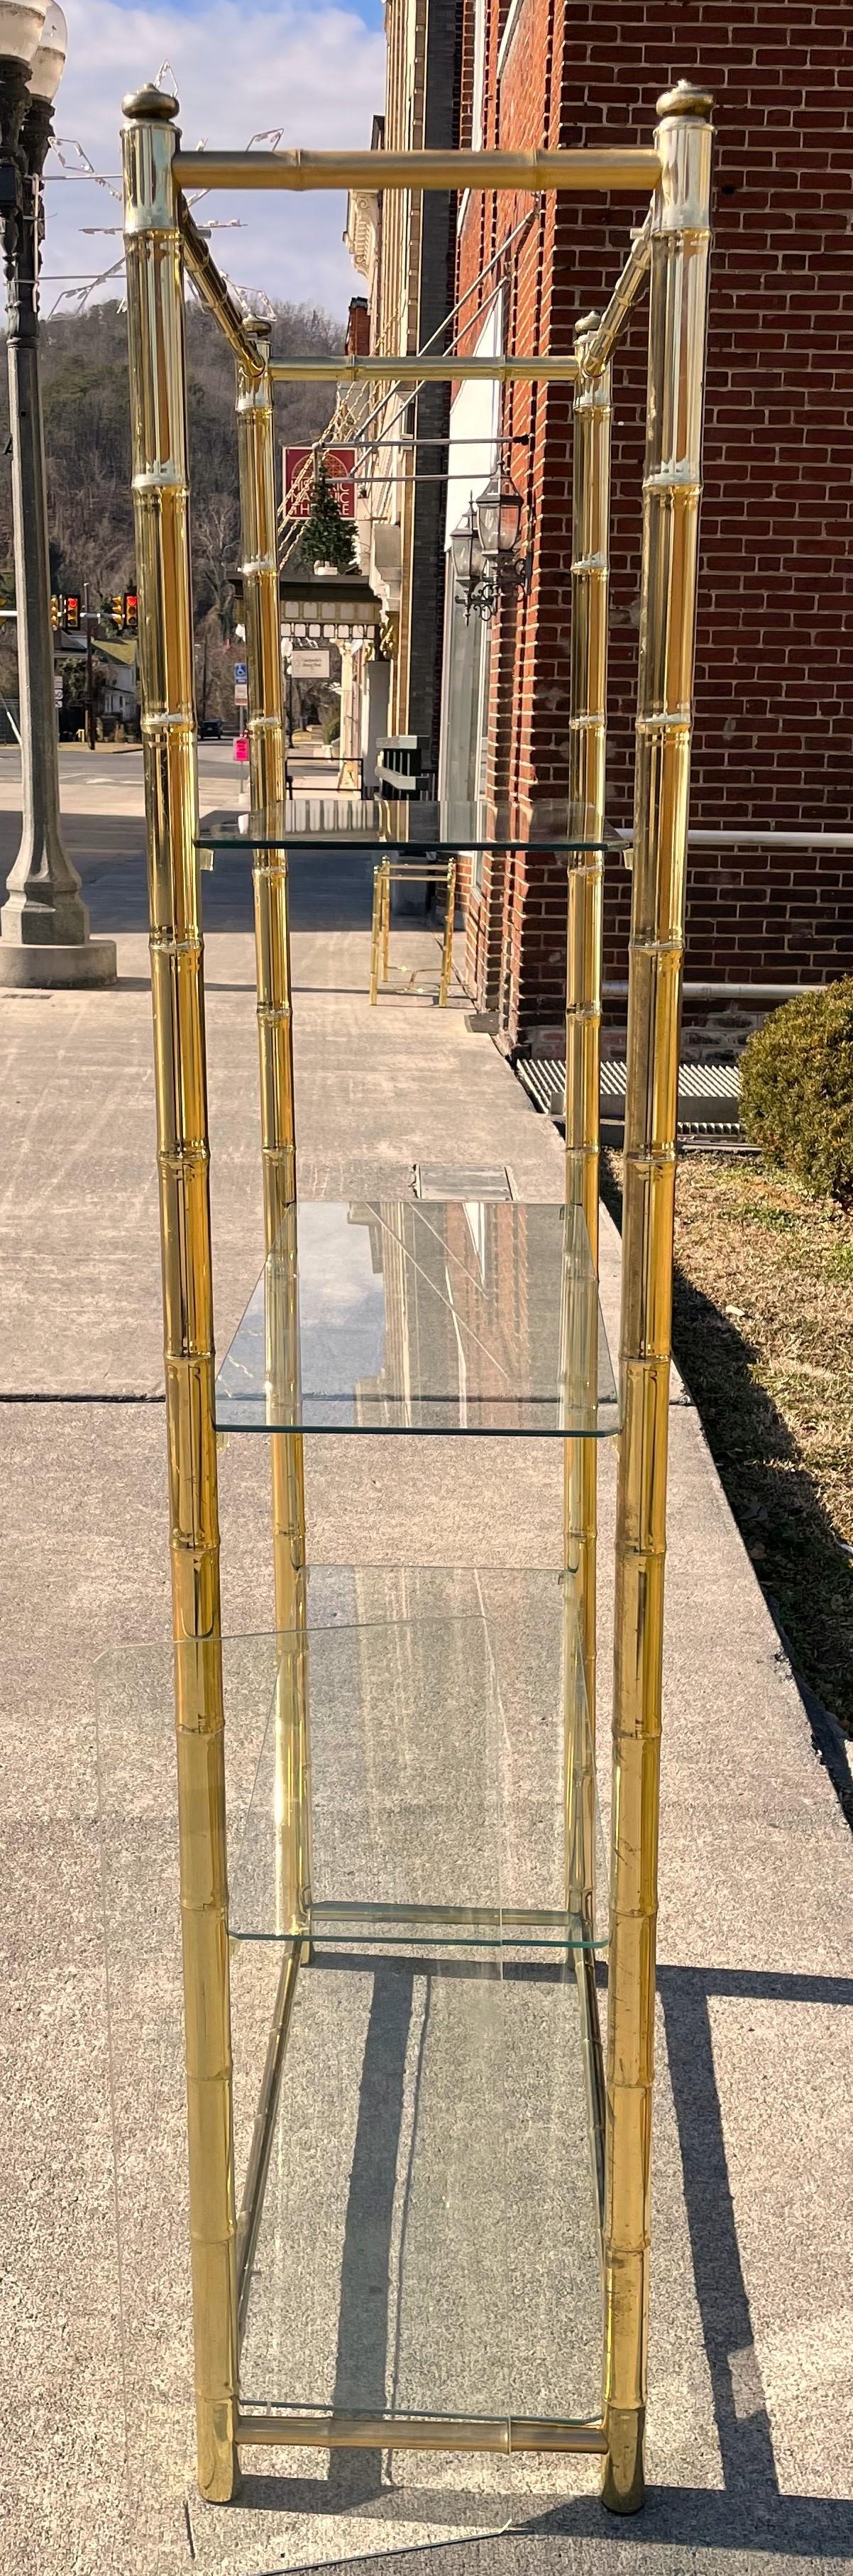 Here is a classy piece made of brass plated metal with 5 glass shelves. I have all the shelves including the top which I could not reach to put on safely for the photos. The metal has scratches, finish loss and signs of age and use (which I have